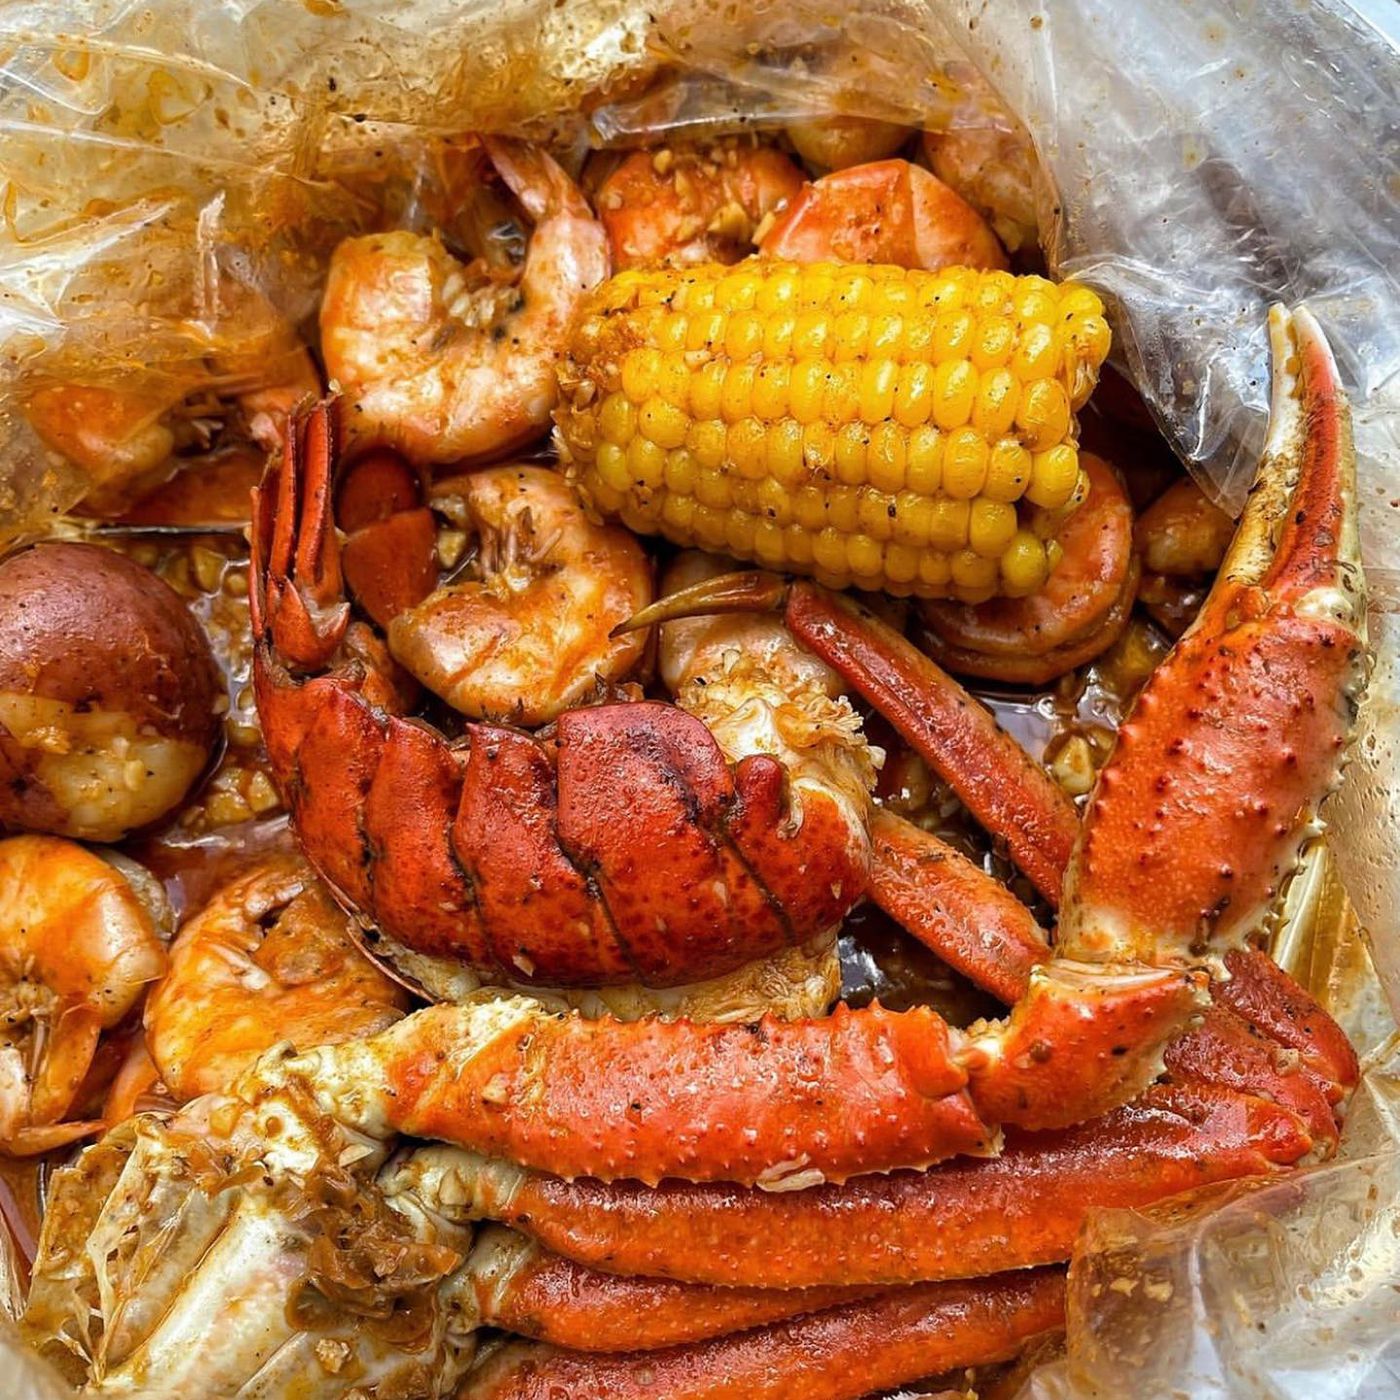 Louisiana Seafood Boil Self-Builder (Catering Sizes)